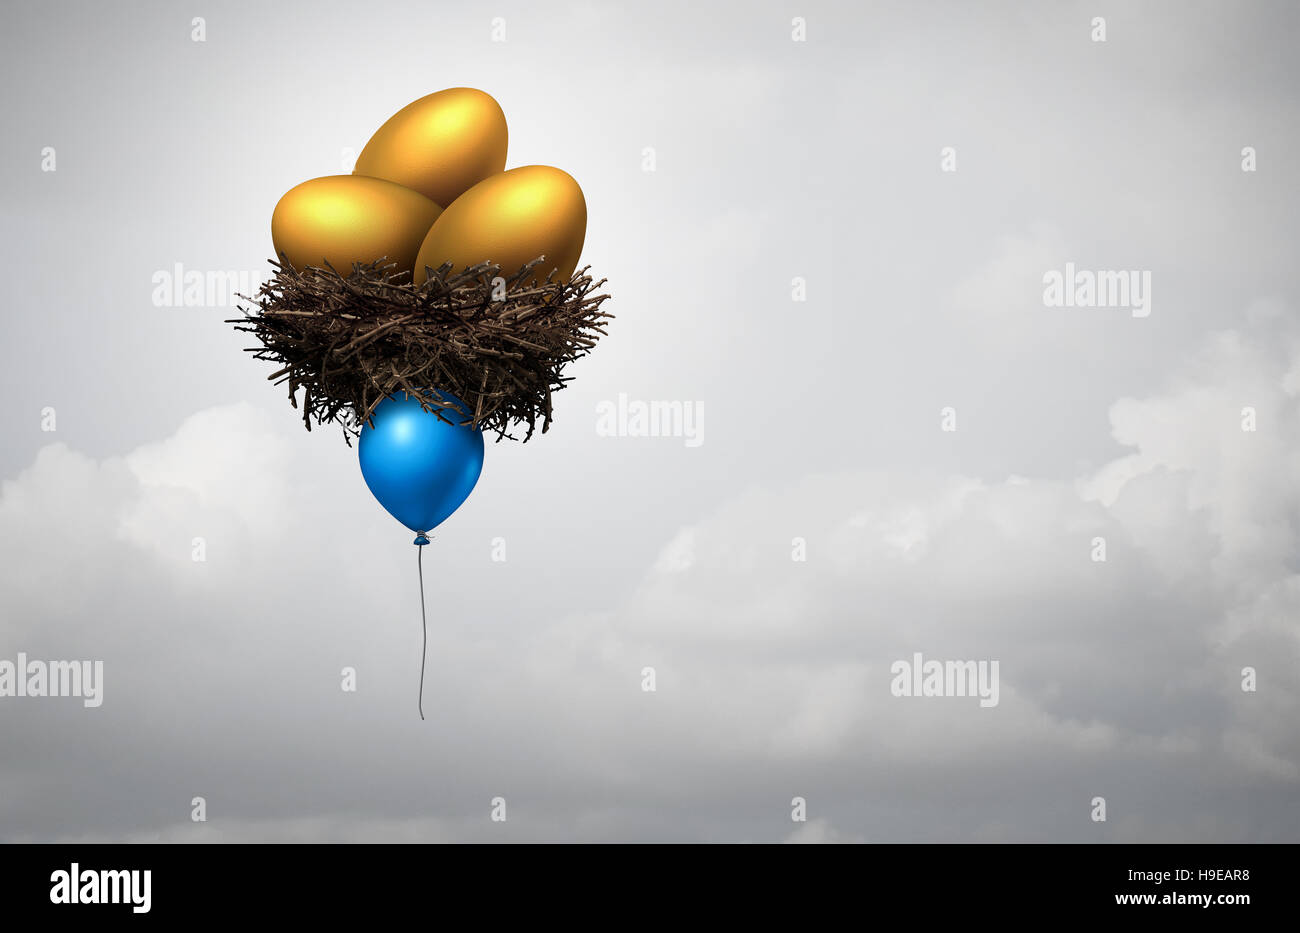 Financial investment guidance concept as a blue balloon lifting a nest with gold eggs as a banking or investing metaphor for retirement fund risk or i Stock Photo